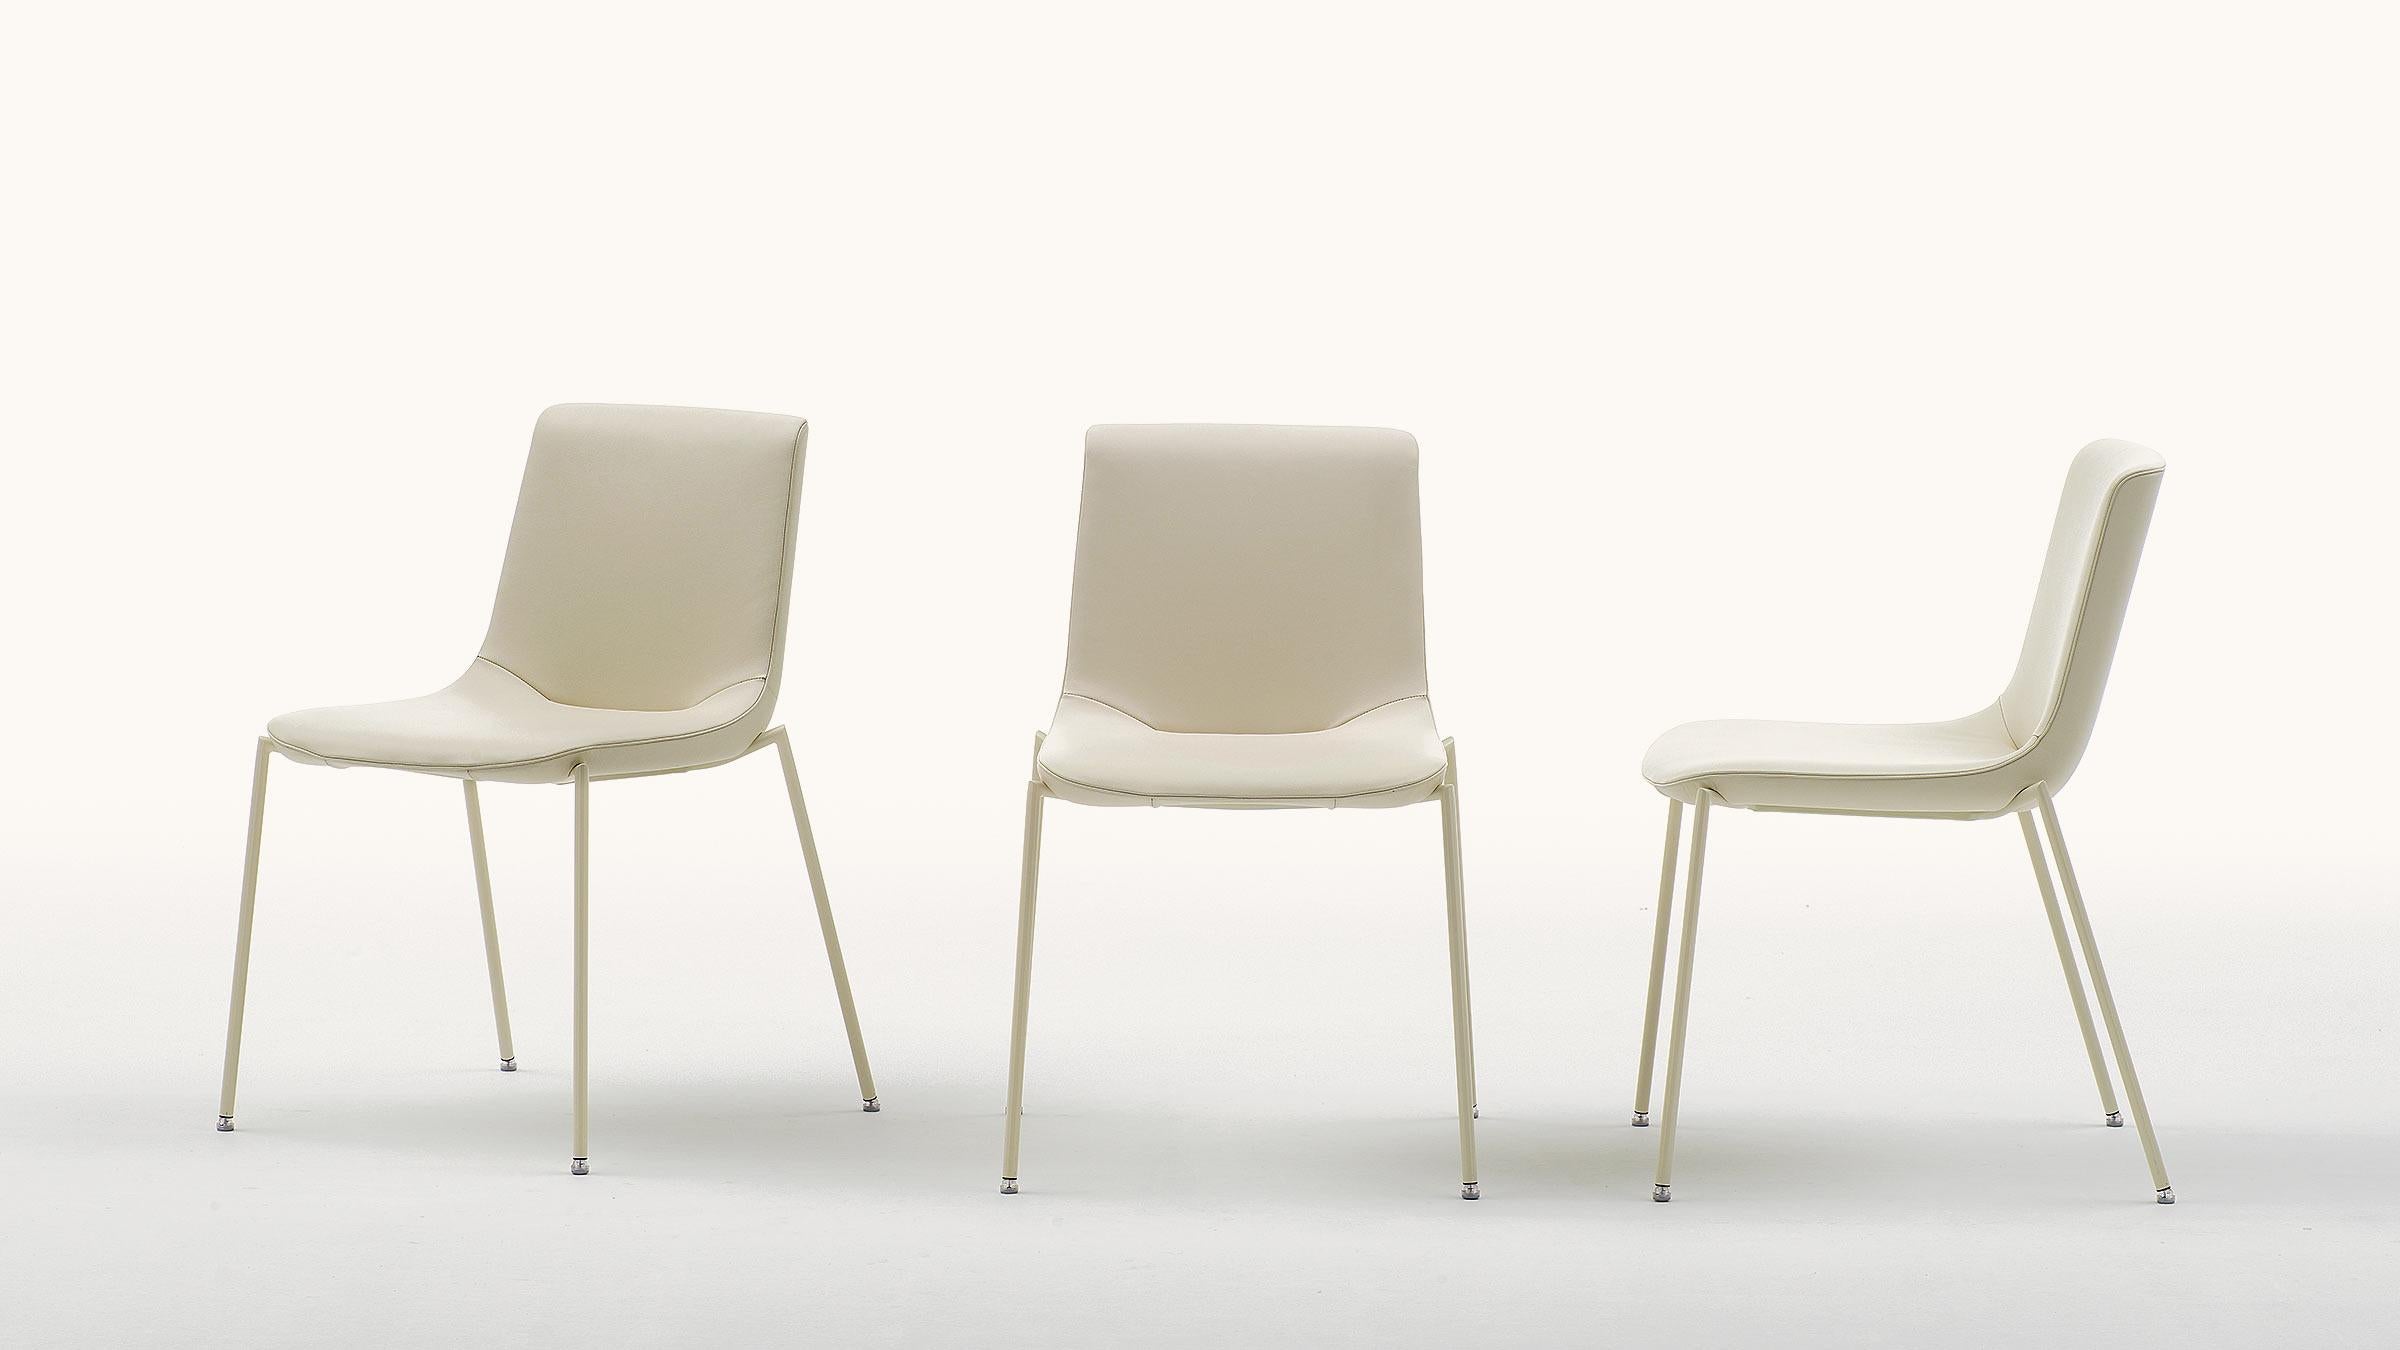 The symbiosis of perfectly shaped, chrome-plated steel tubes and the highest art of upholstery technology creates a chair that leaves its peers behind in its quality. In the manner of Claudio Bellini, the chairs address the human desire we all know: